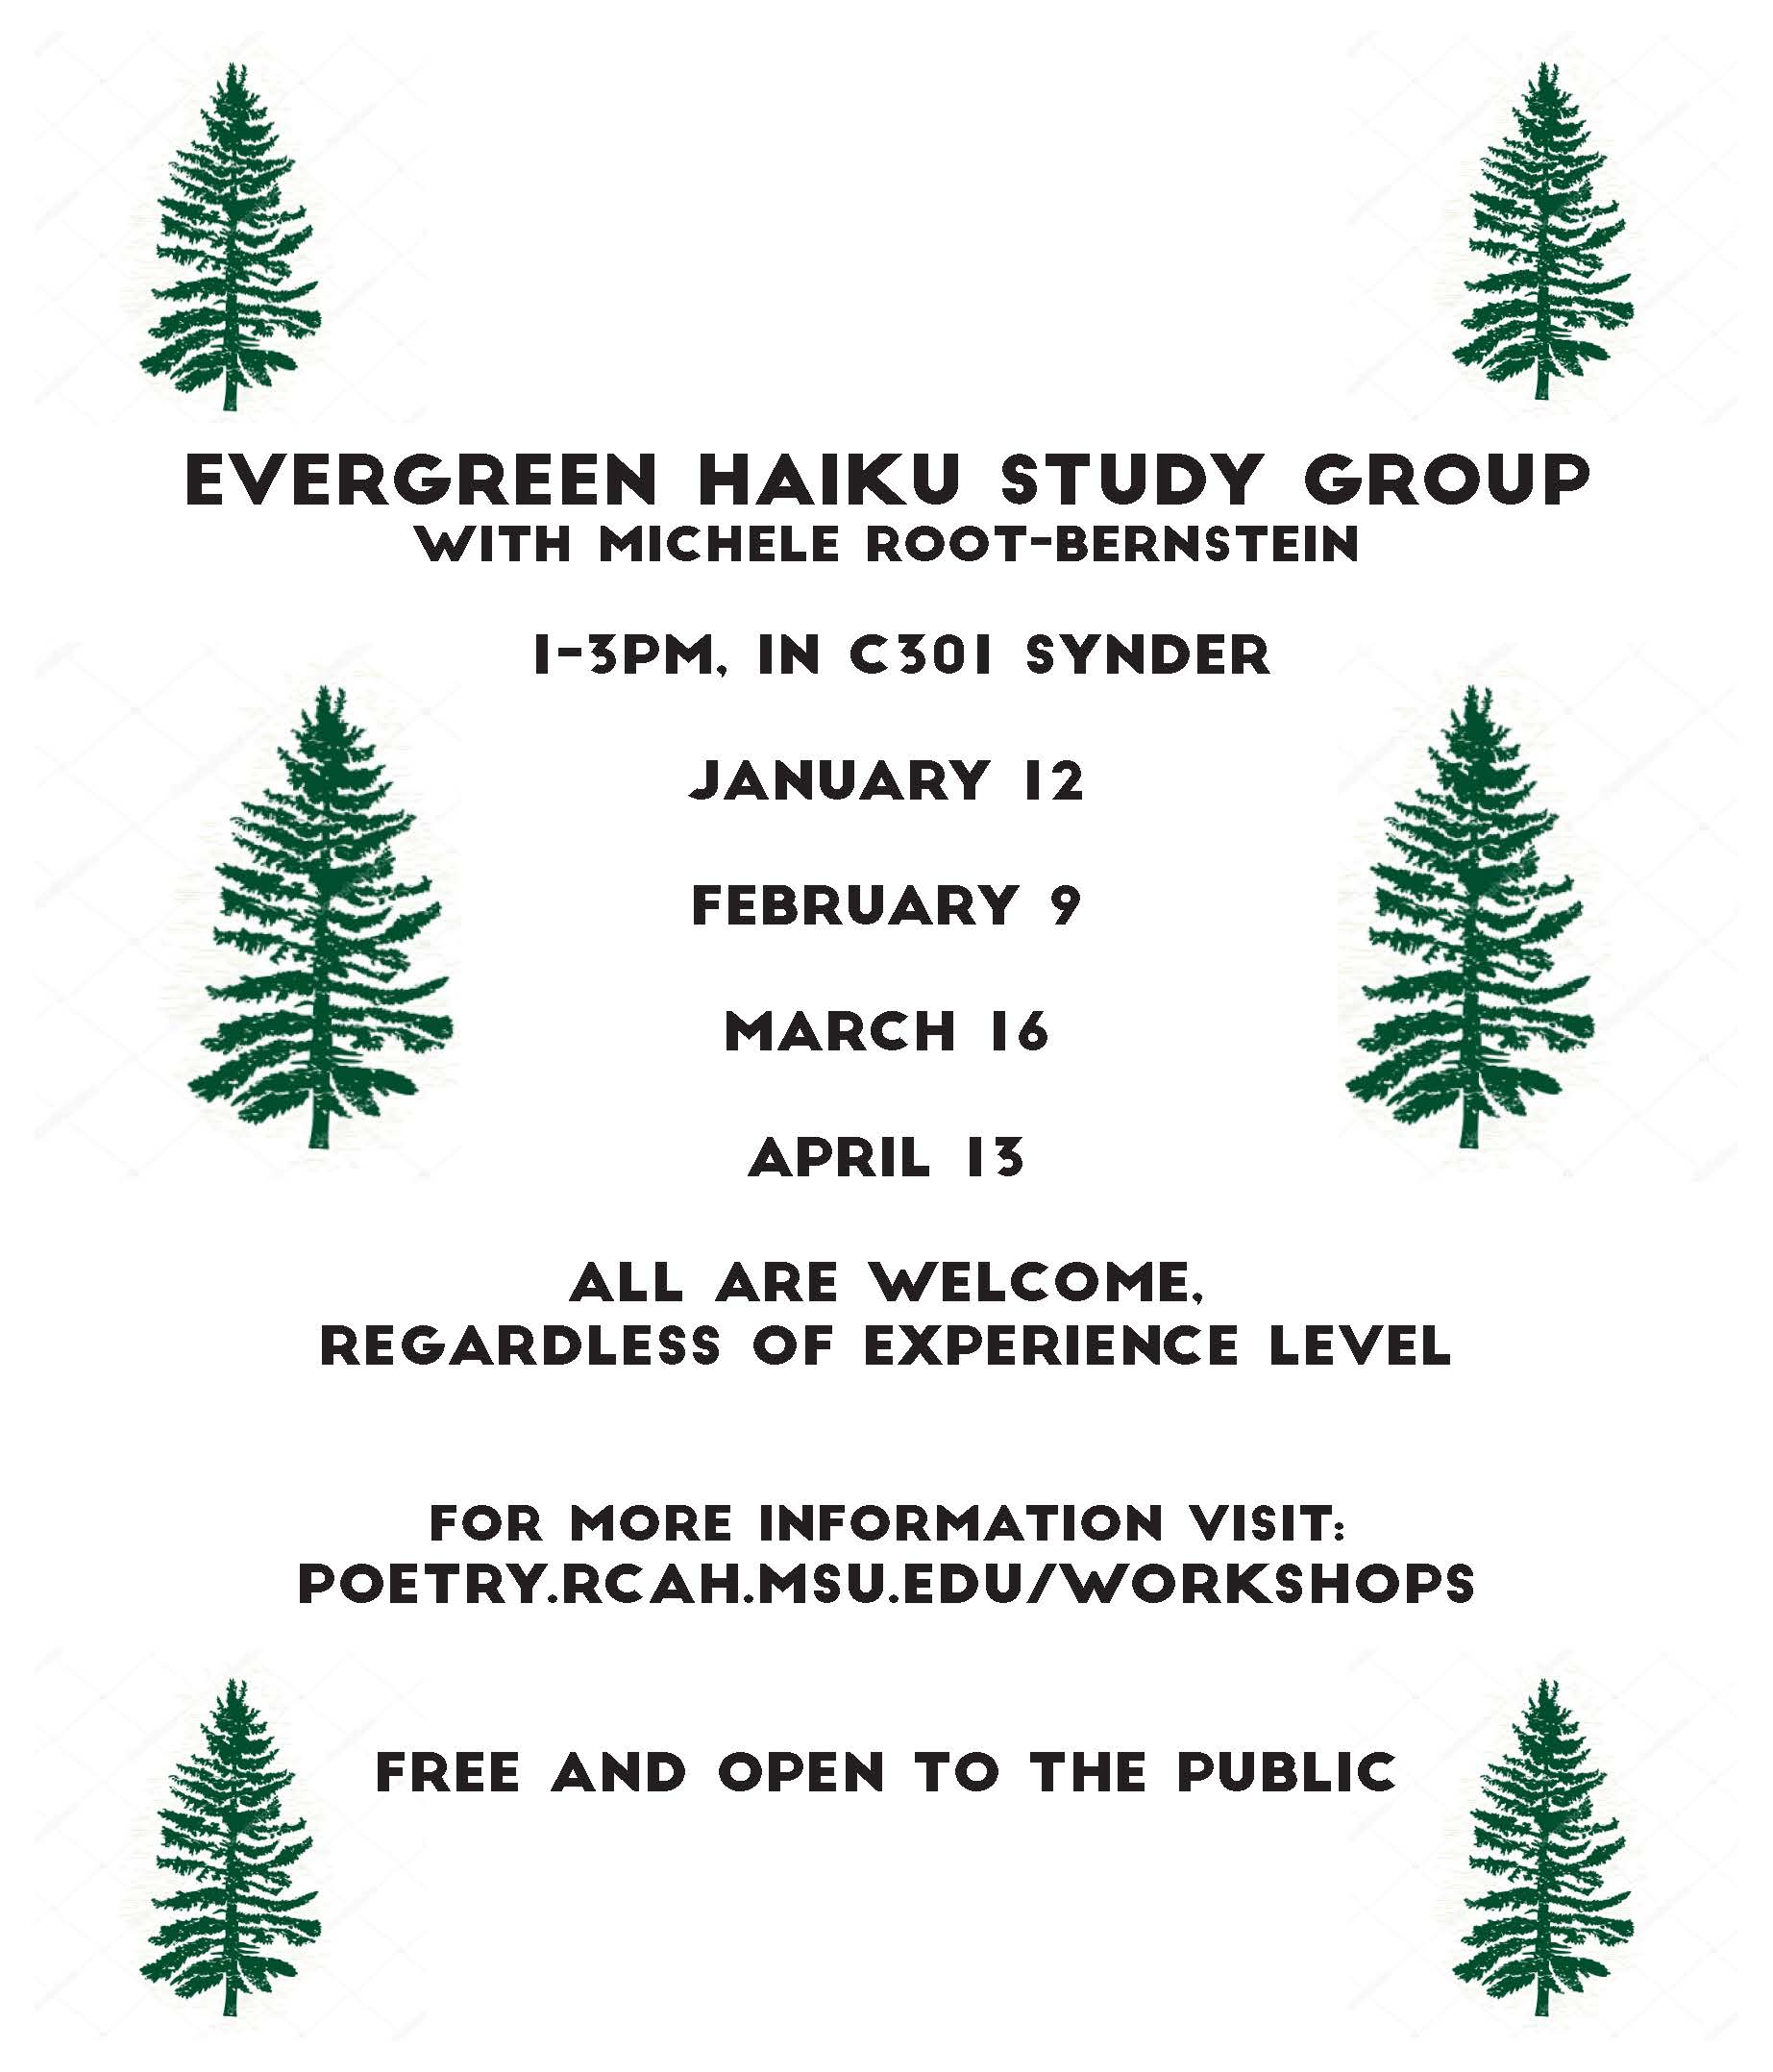 Evergreen Haiku study group flyer. Download pdf with text by clicking.